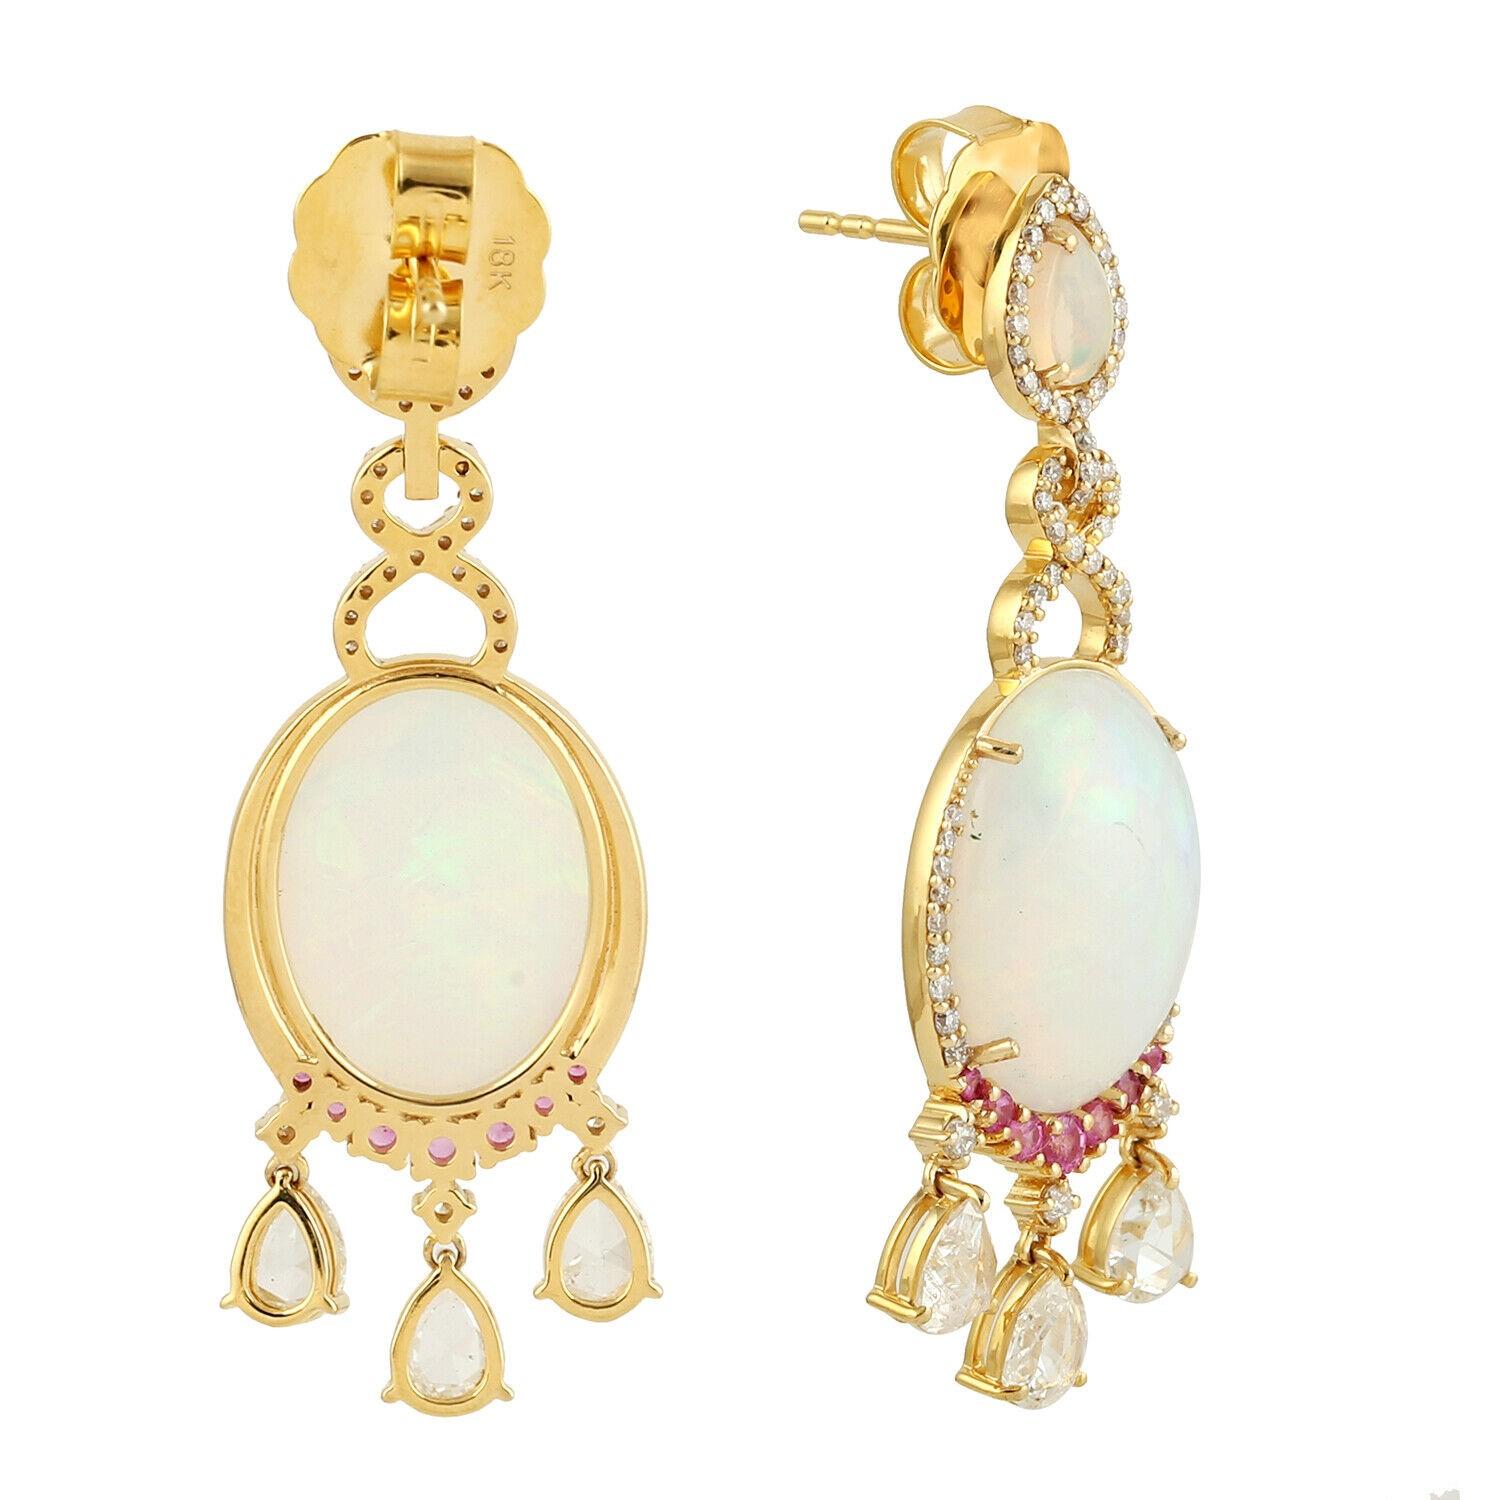 Cast in 14 karat gold. These earrings are hand set in 9.78 carats Ethiopian opal and topaz, 1.87 carats of sparkling diamonds. 

FOLLOW MEGHNA JEWELS storefront to view the latest collection & exclusive pieces. Meghna Jewels is proudly rated as a